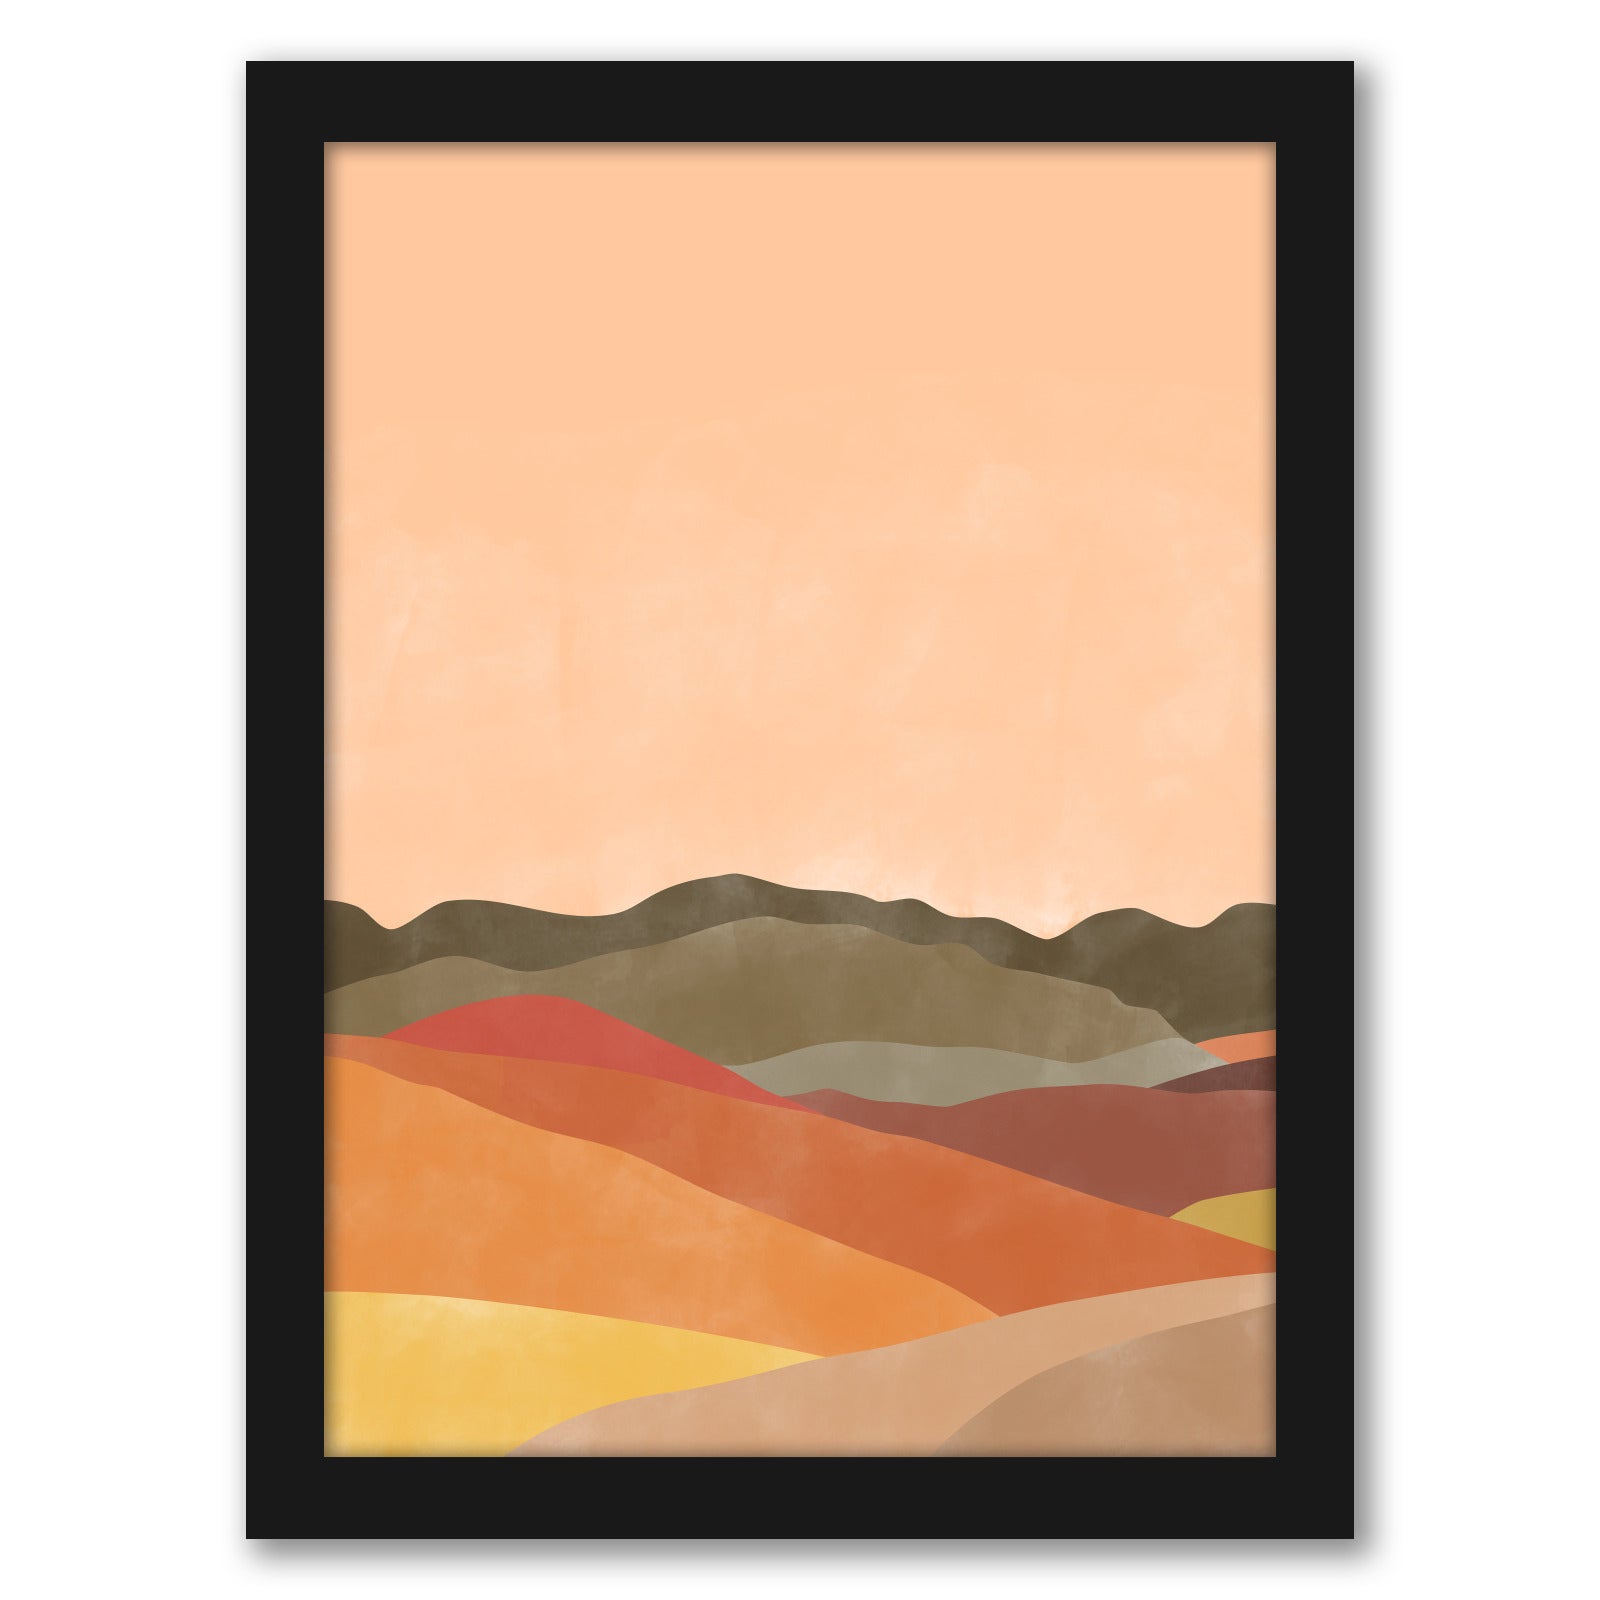 Vintage Terracotta Yellow Landscape Boho 2 by The Print Republic - Canvas, Poster or Framed Print